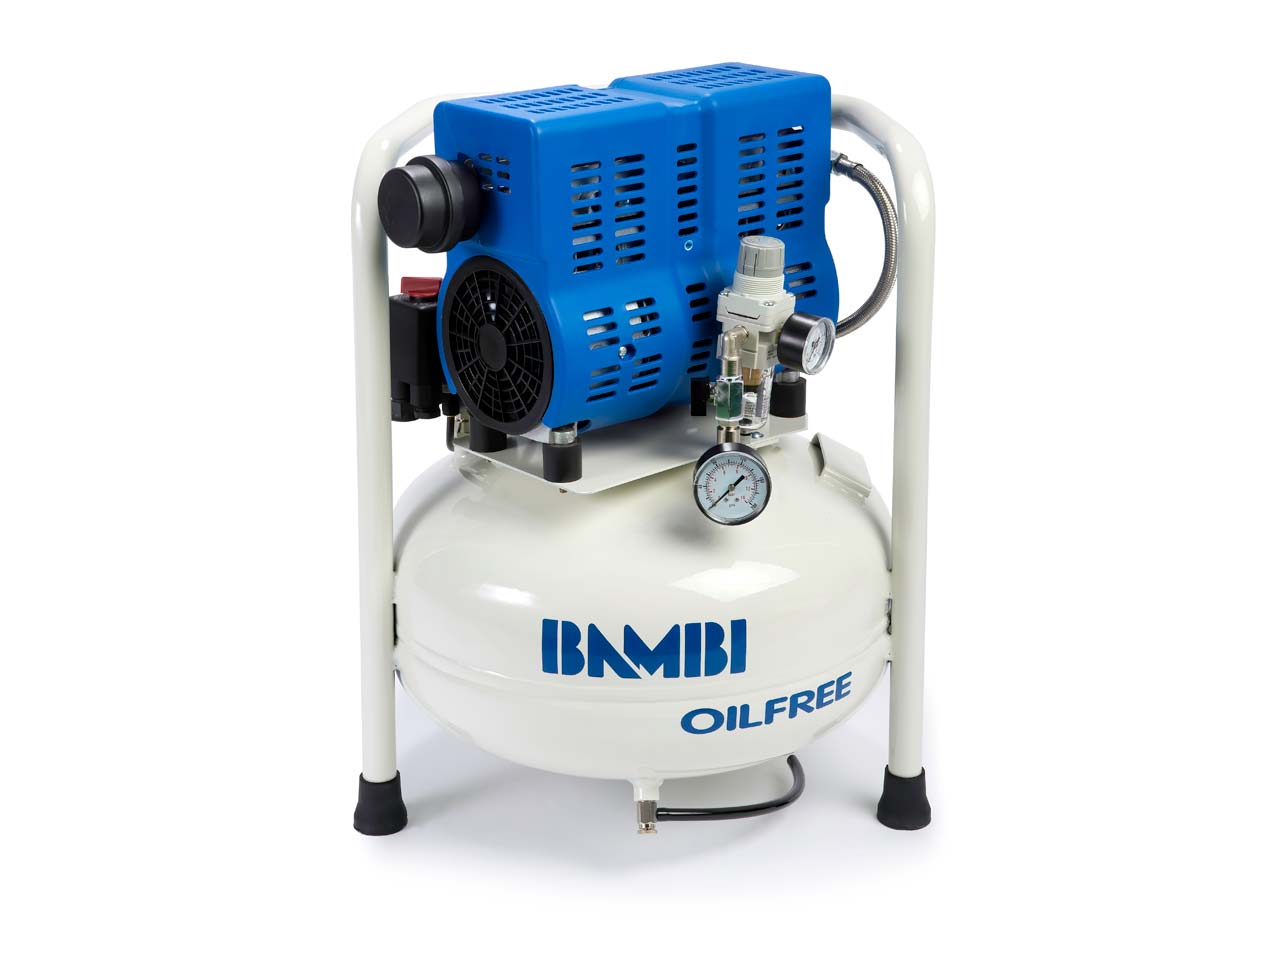 Do you have instructions for Bambi PT24 0.75hp Oil Free, 8 Bar 24 Litre Capacity Compressor?